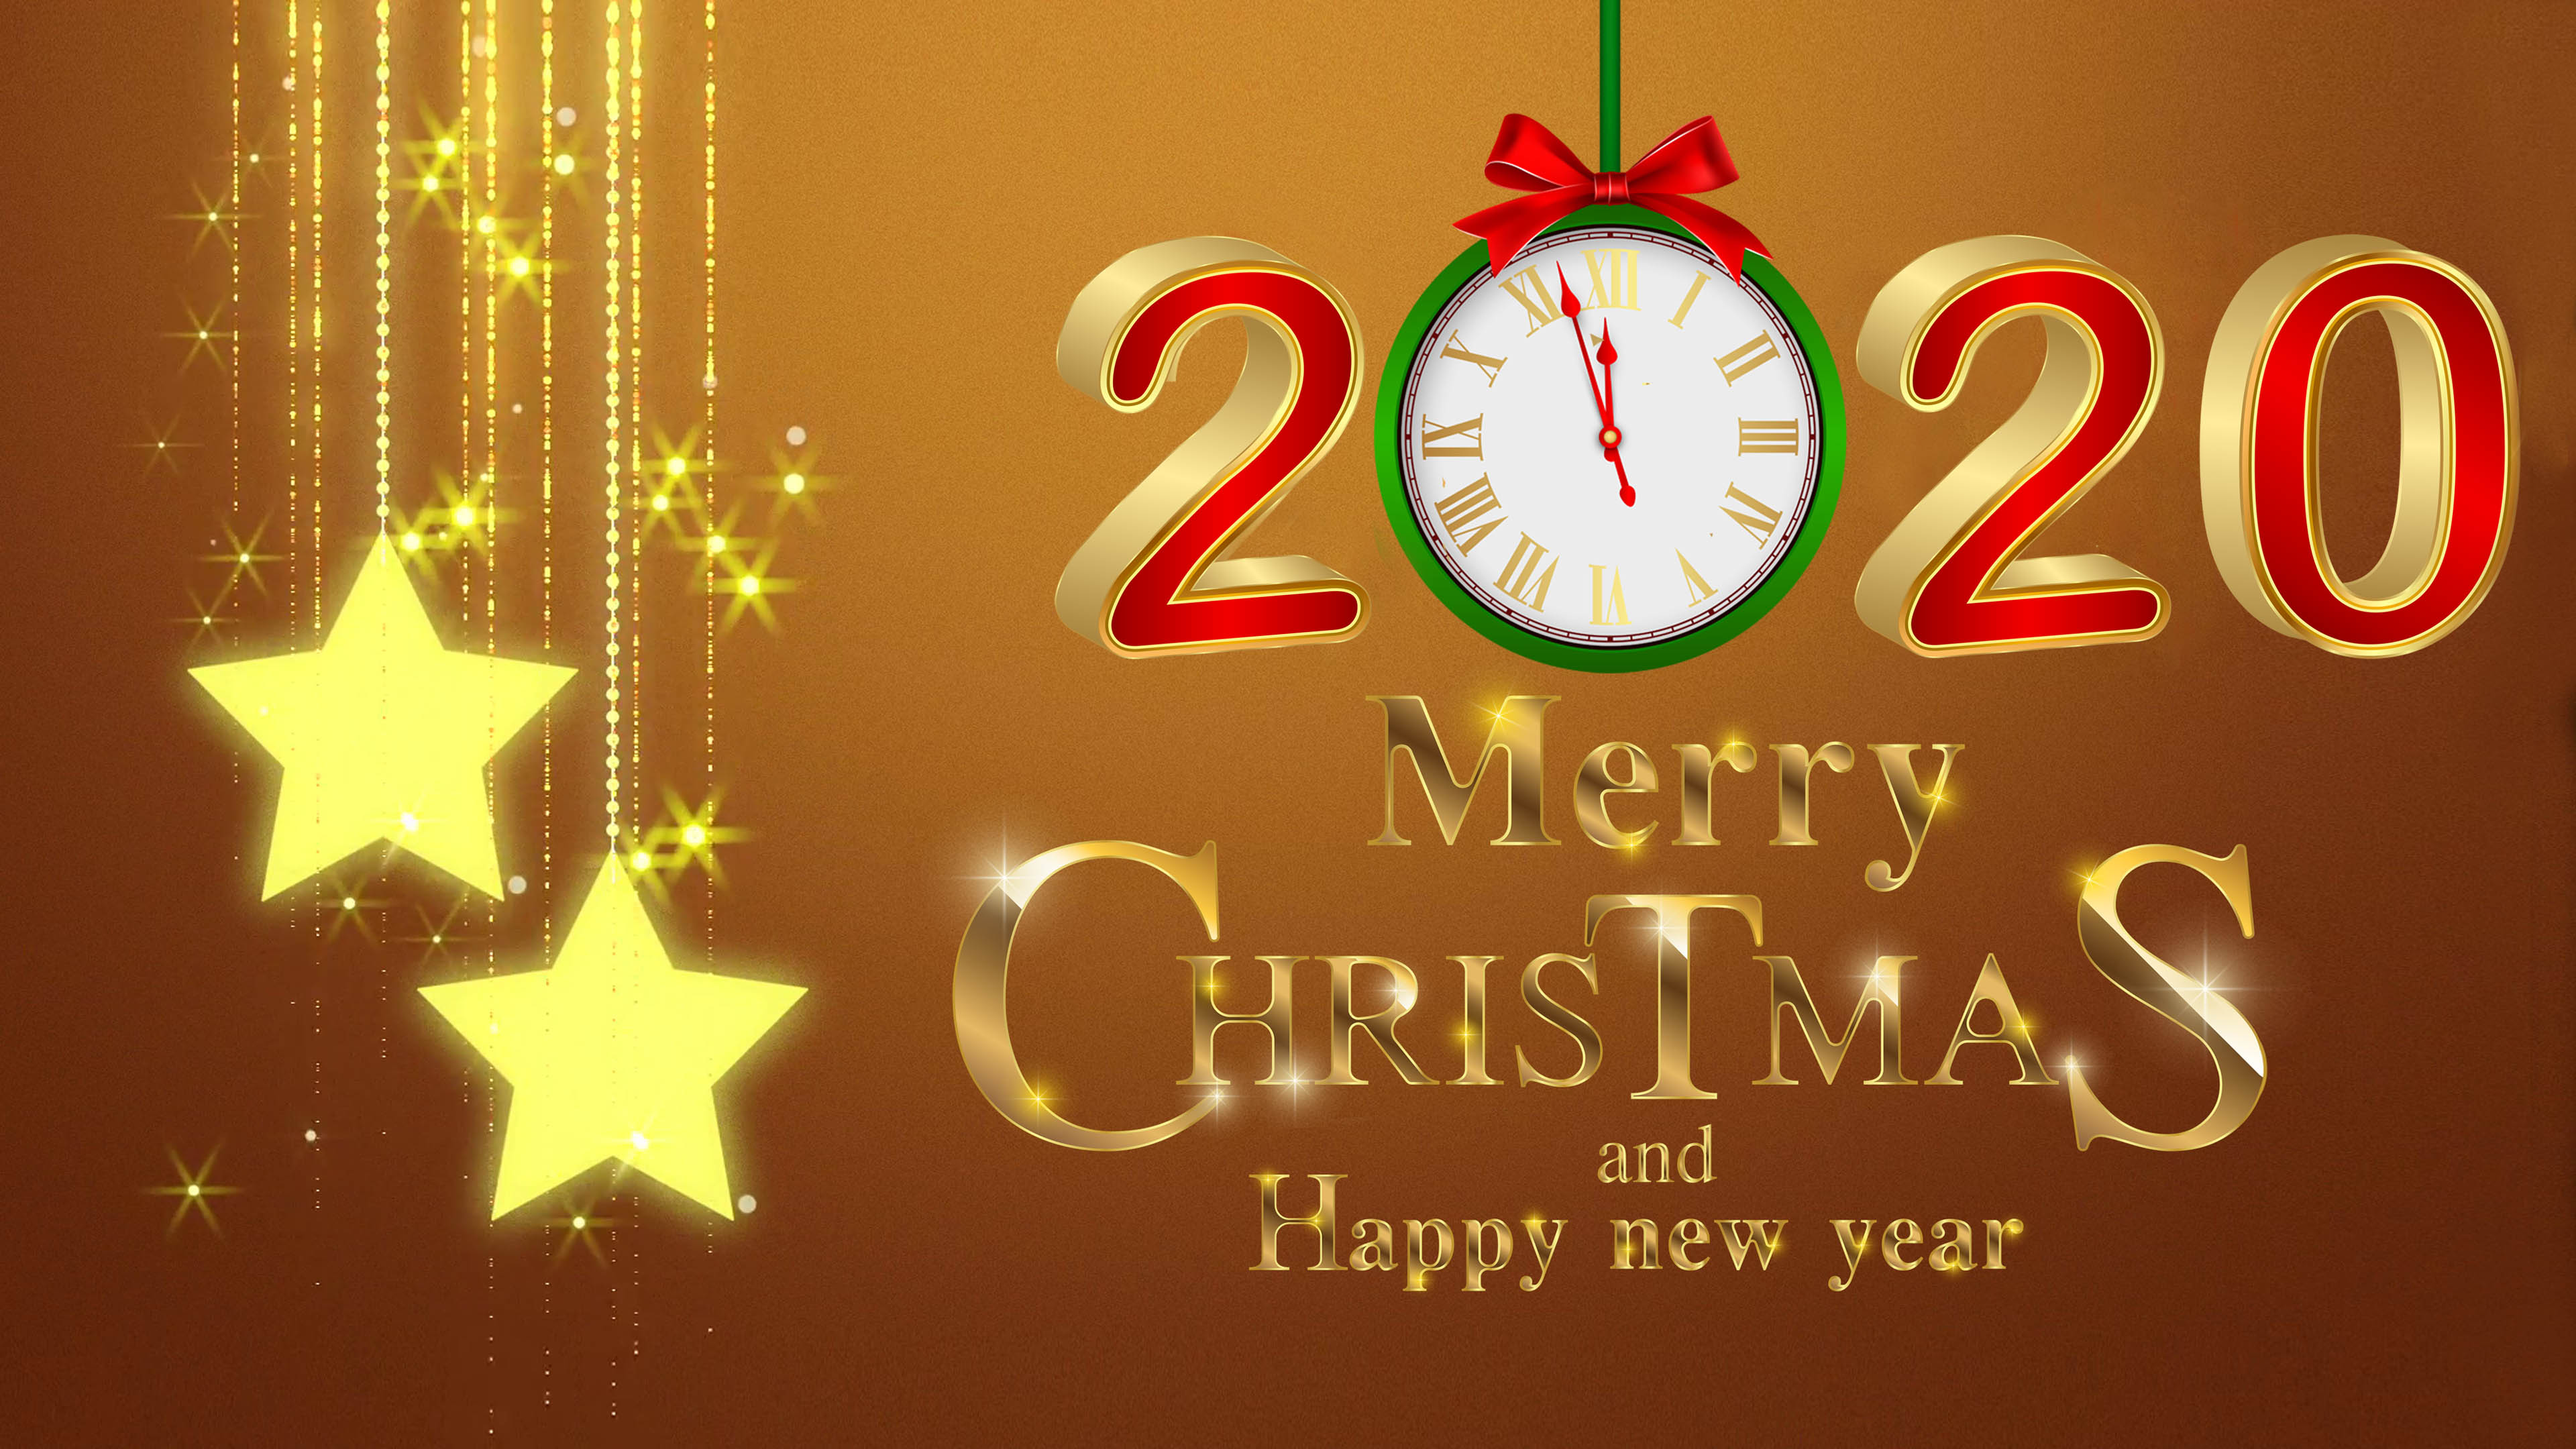 Free download Merry Christmas And Happy New Year 2020 Gold 4k